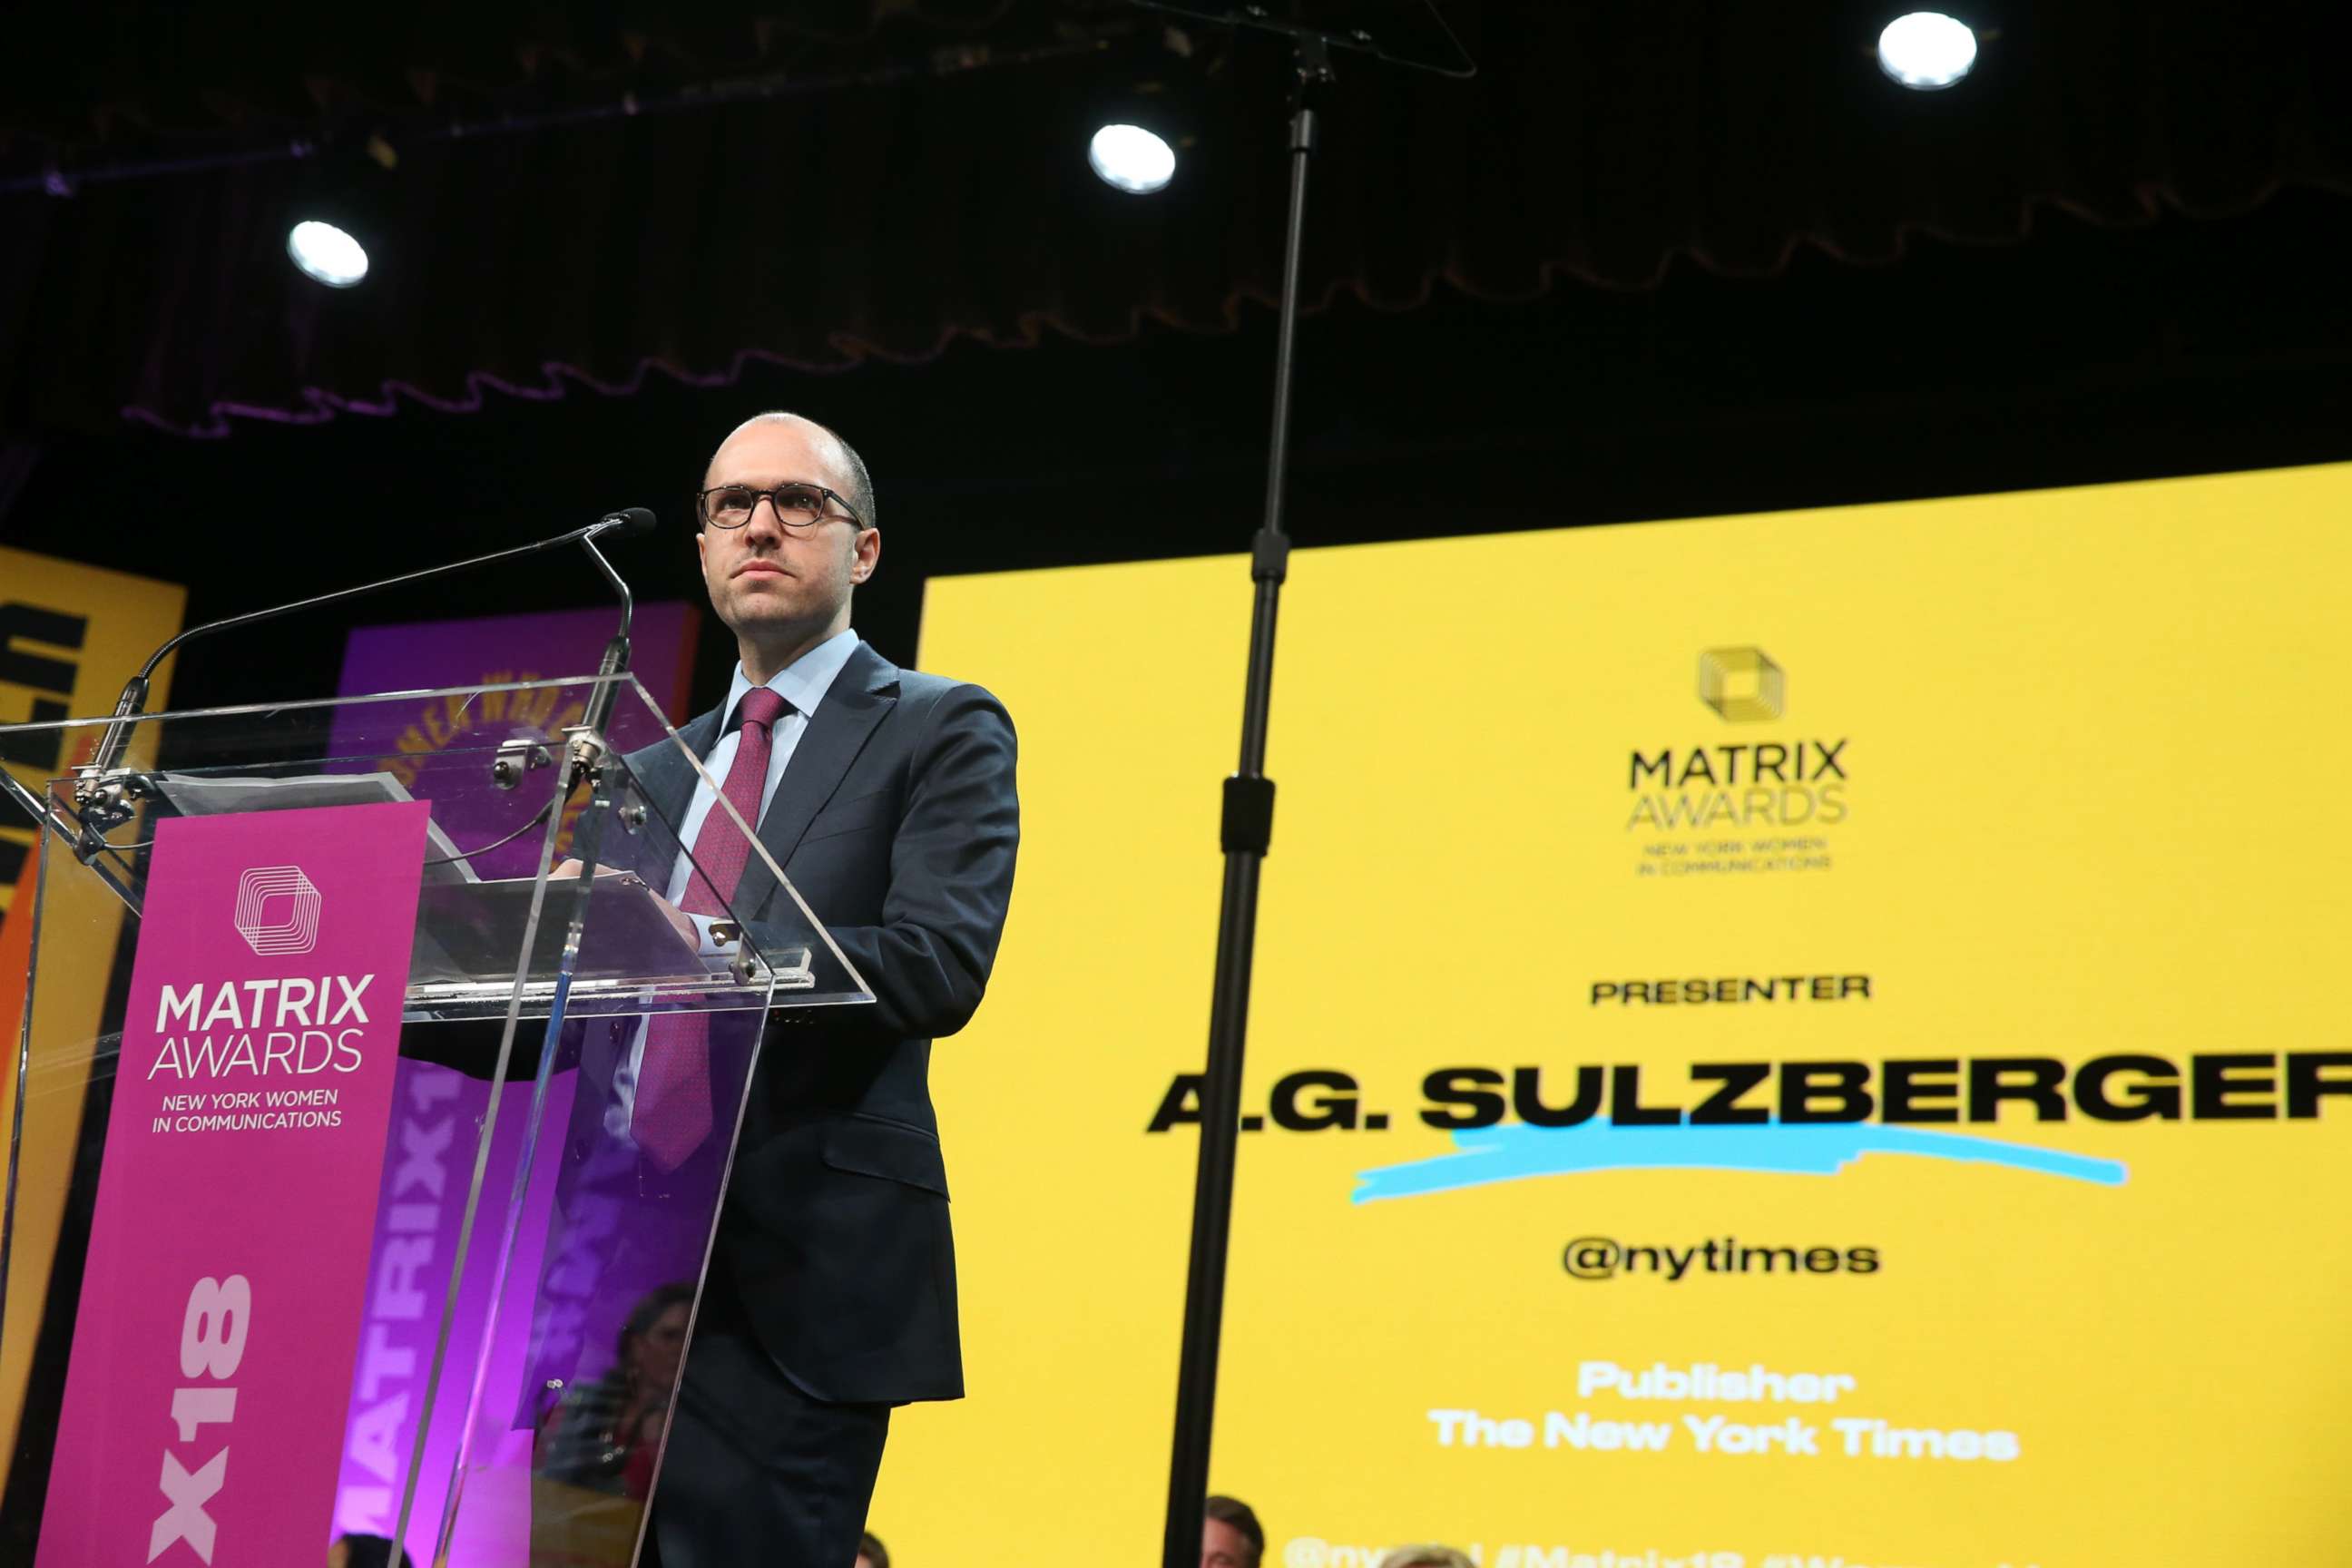 PHOTO: A.G. Sulzberger attends the 2018 Matrix Awards at Sheraton Times Square on April 23, 2018 in New York City.